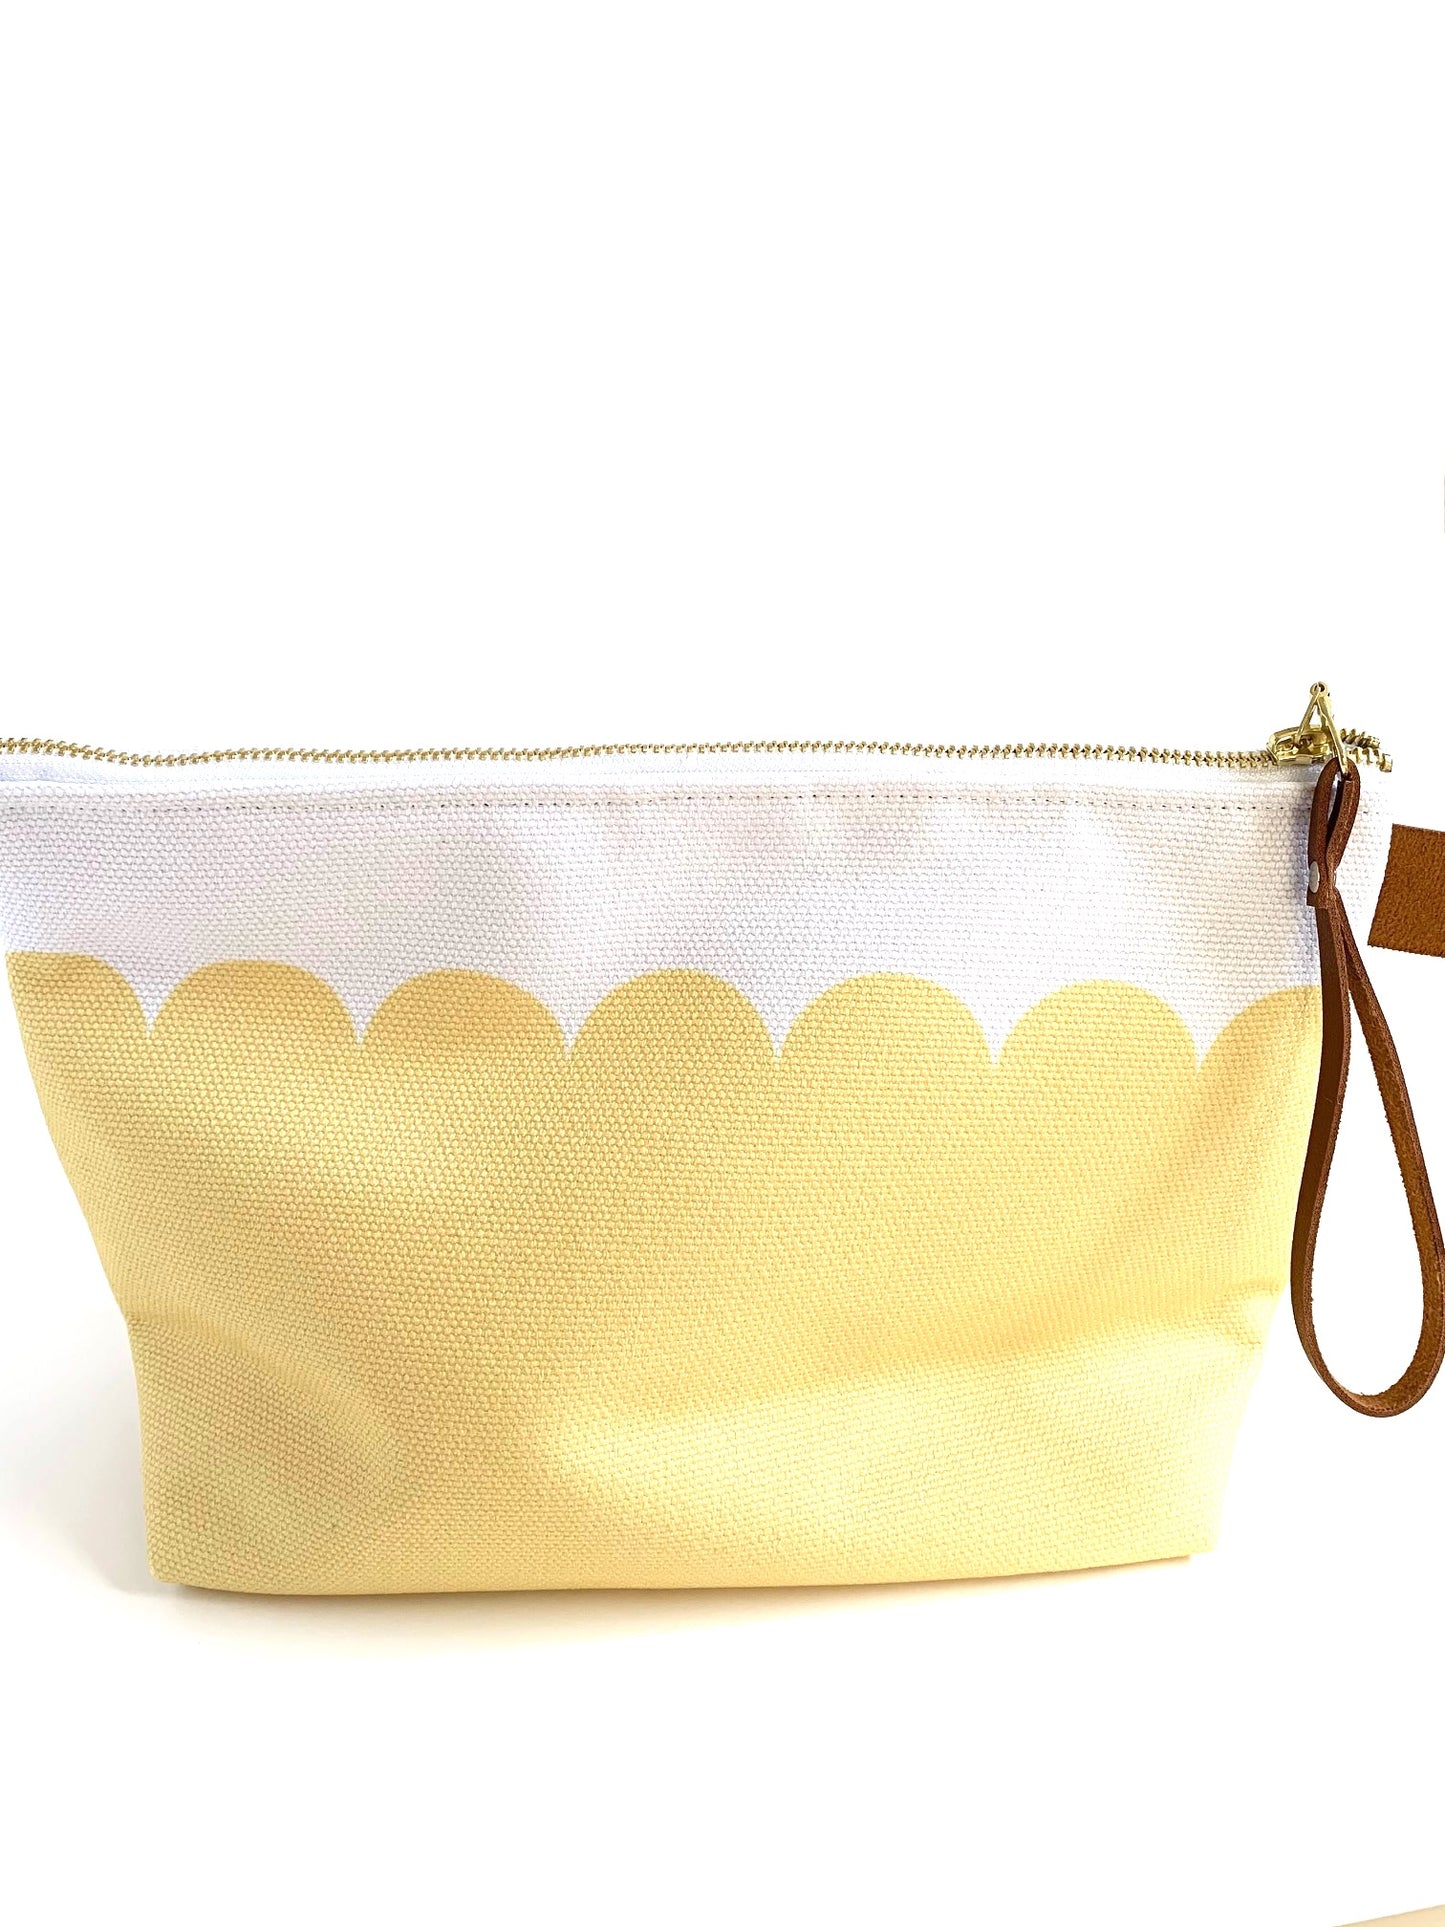 Personalized Zippered Pouch - Yellow Scallop